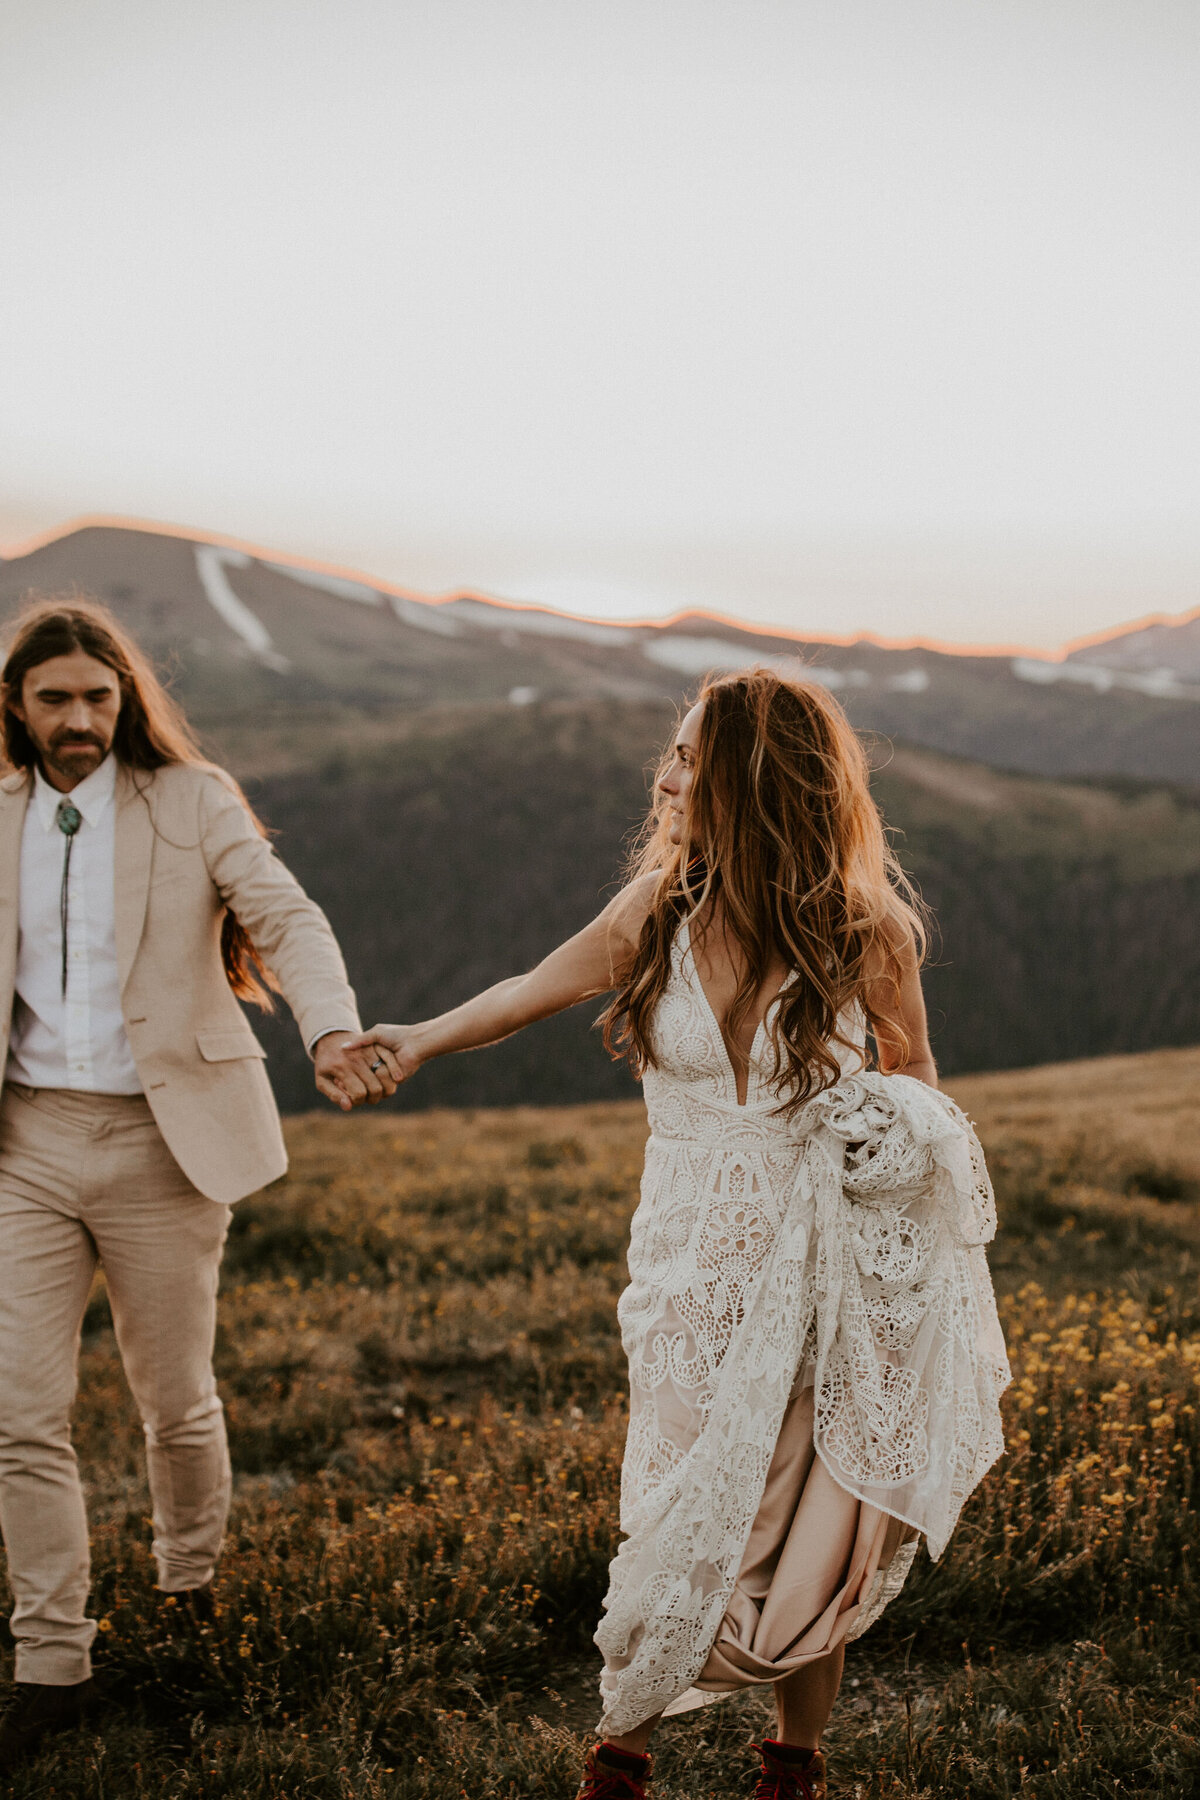 bride and groom wearing an ivory wedding gown and tuxedo pose holding hands in the mountains